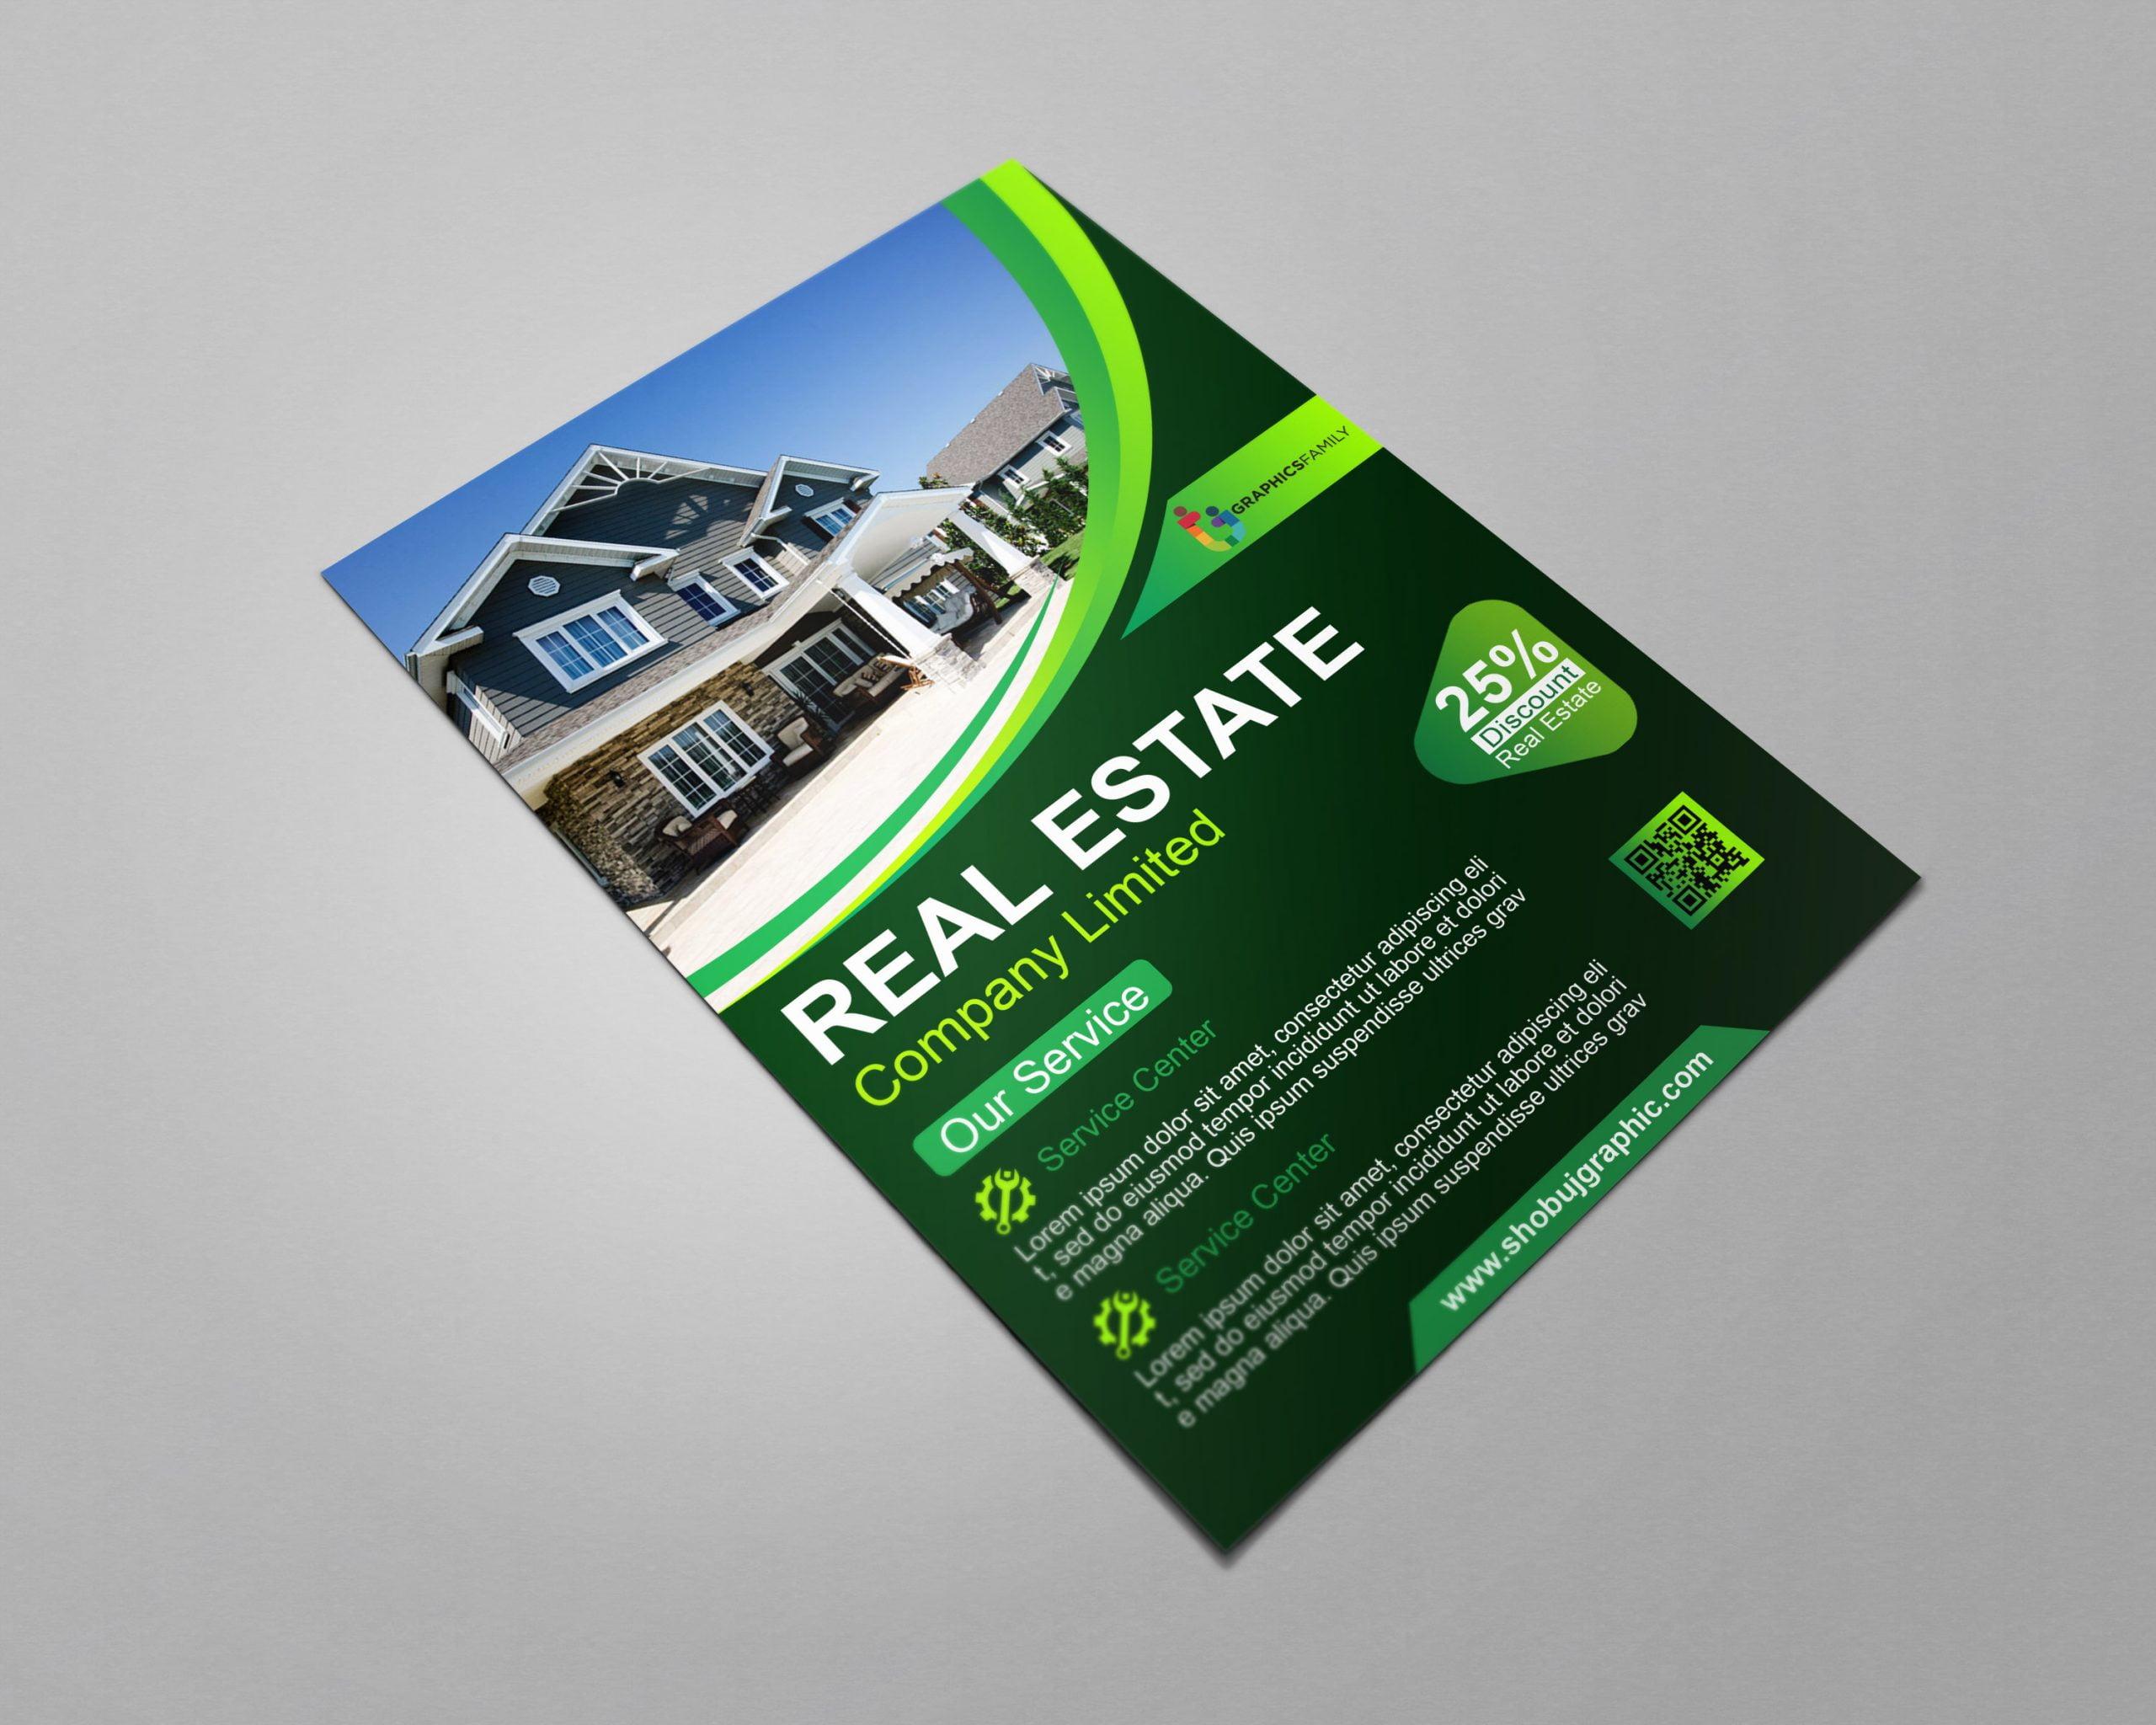 Free Real Estate Flyer Templates Download